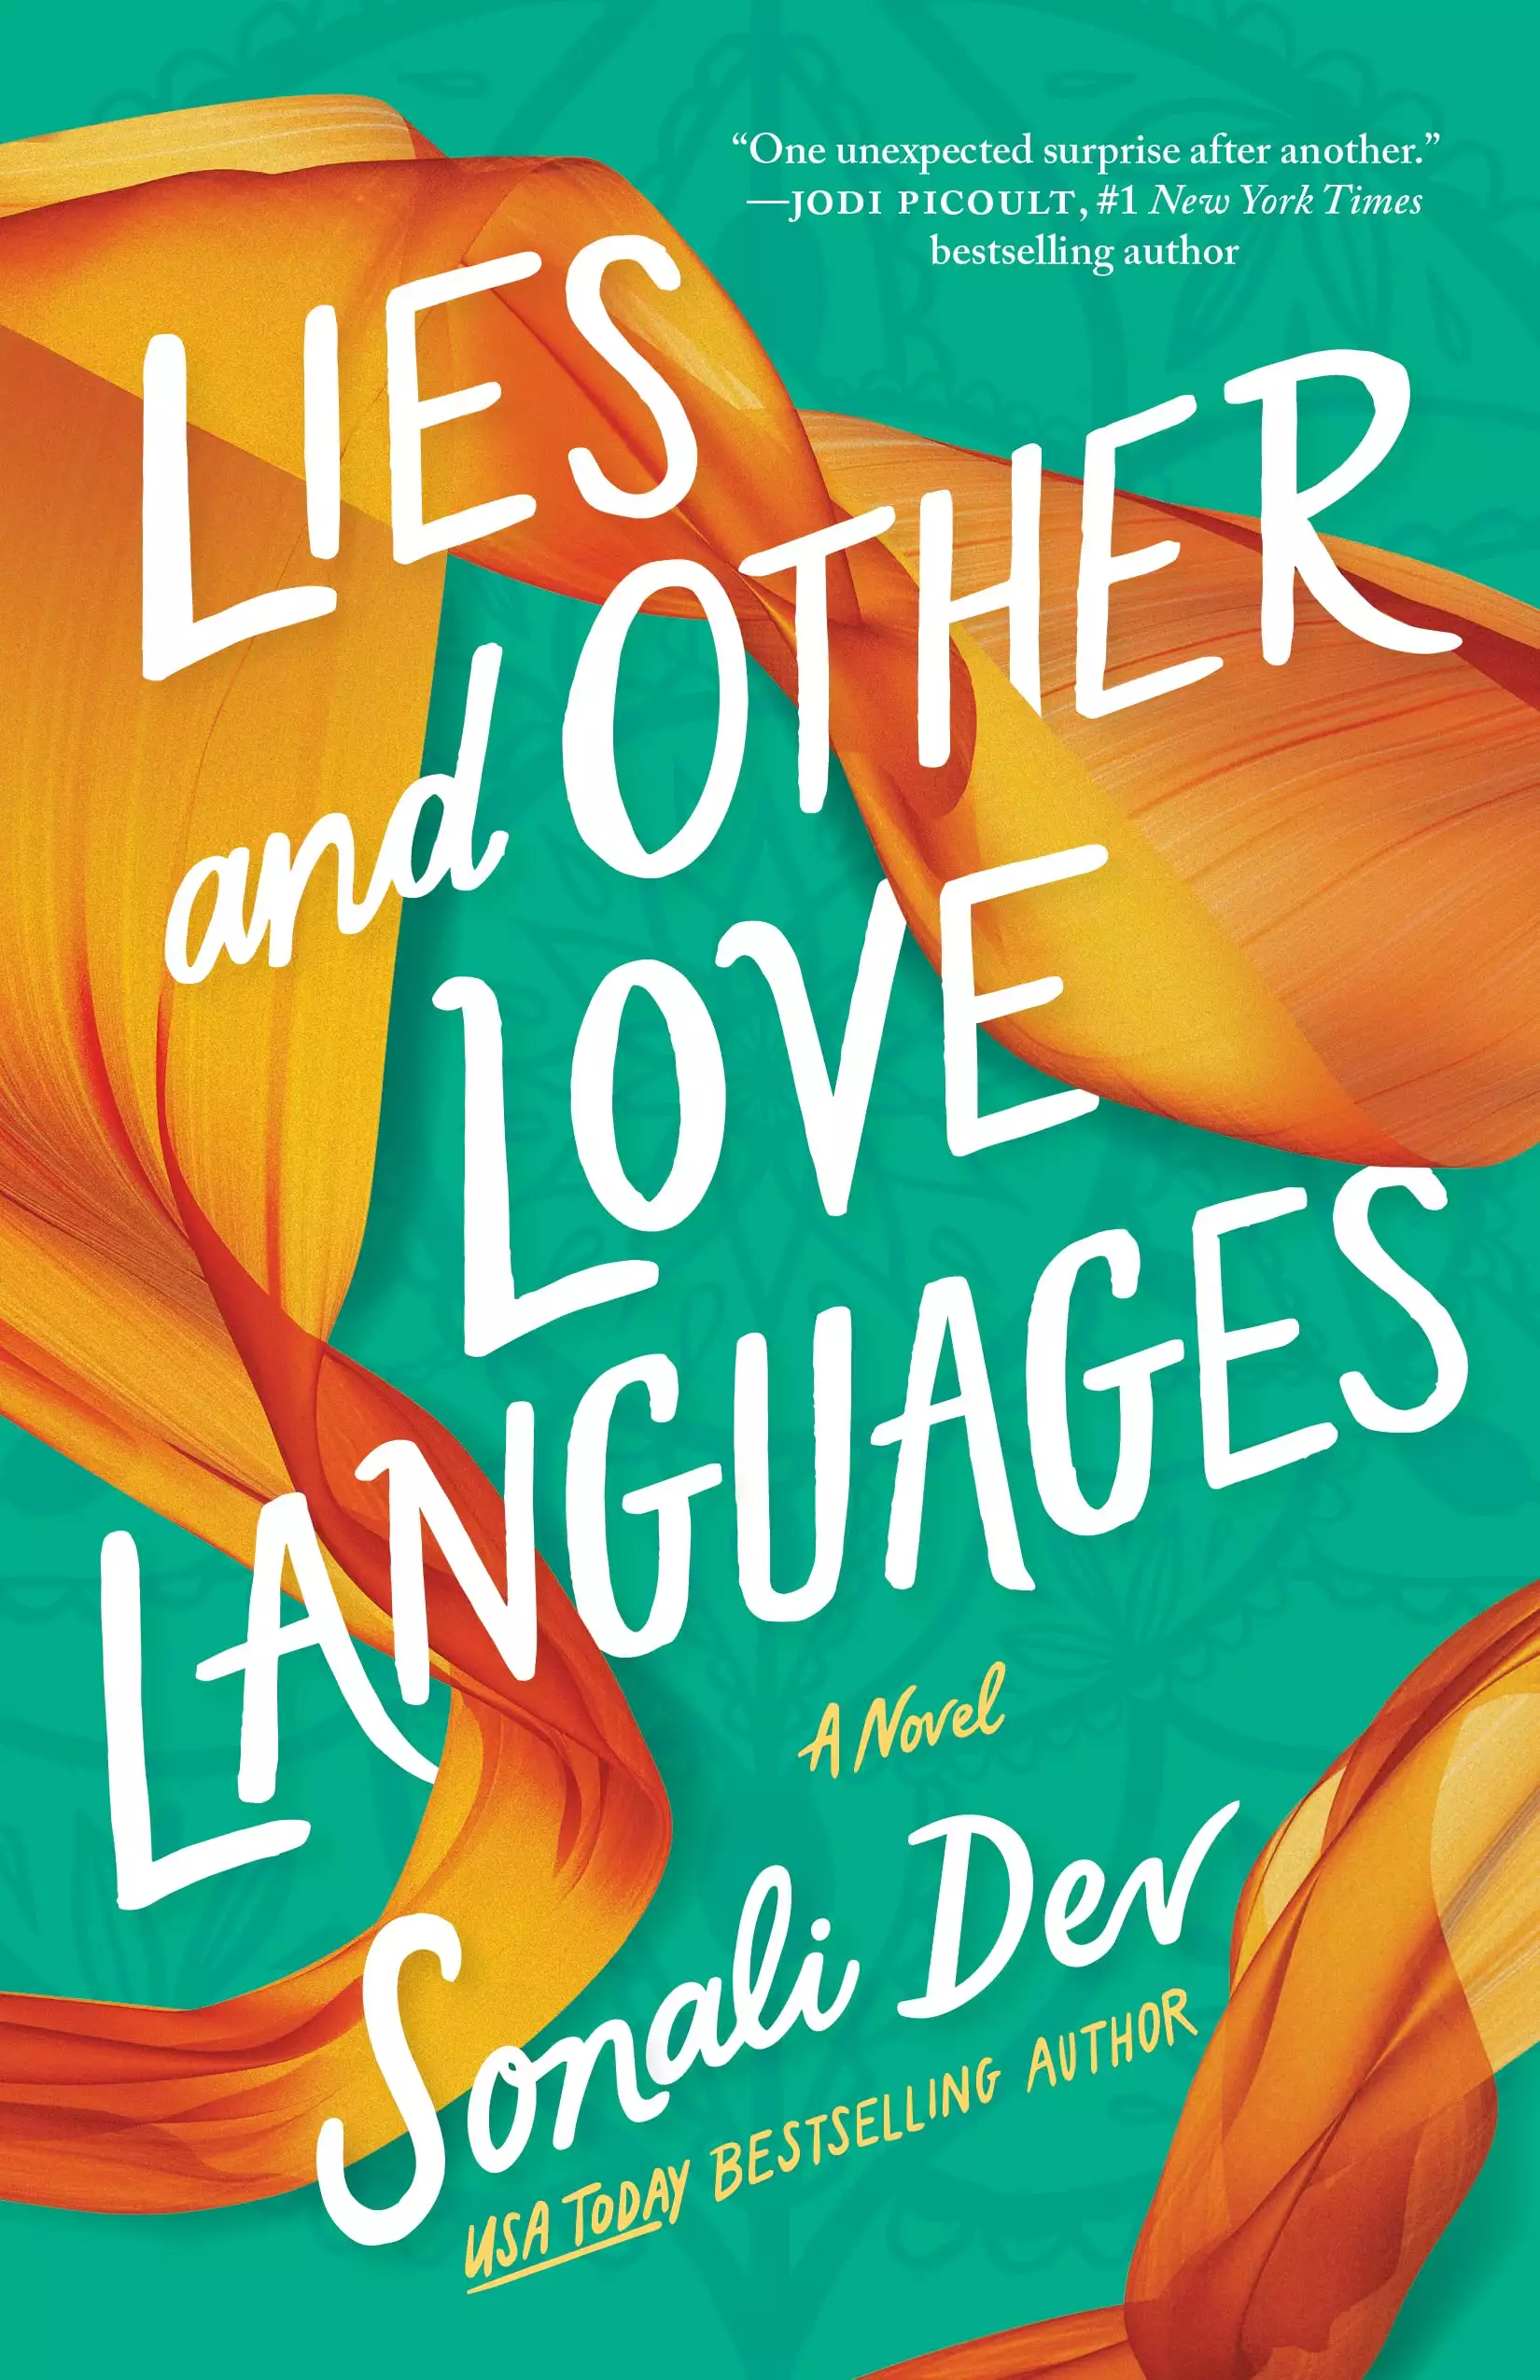 Lies and Other Love Languages: A Novel